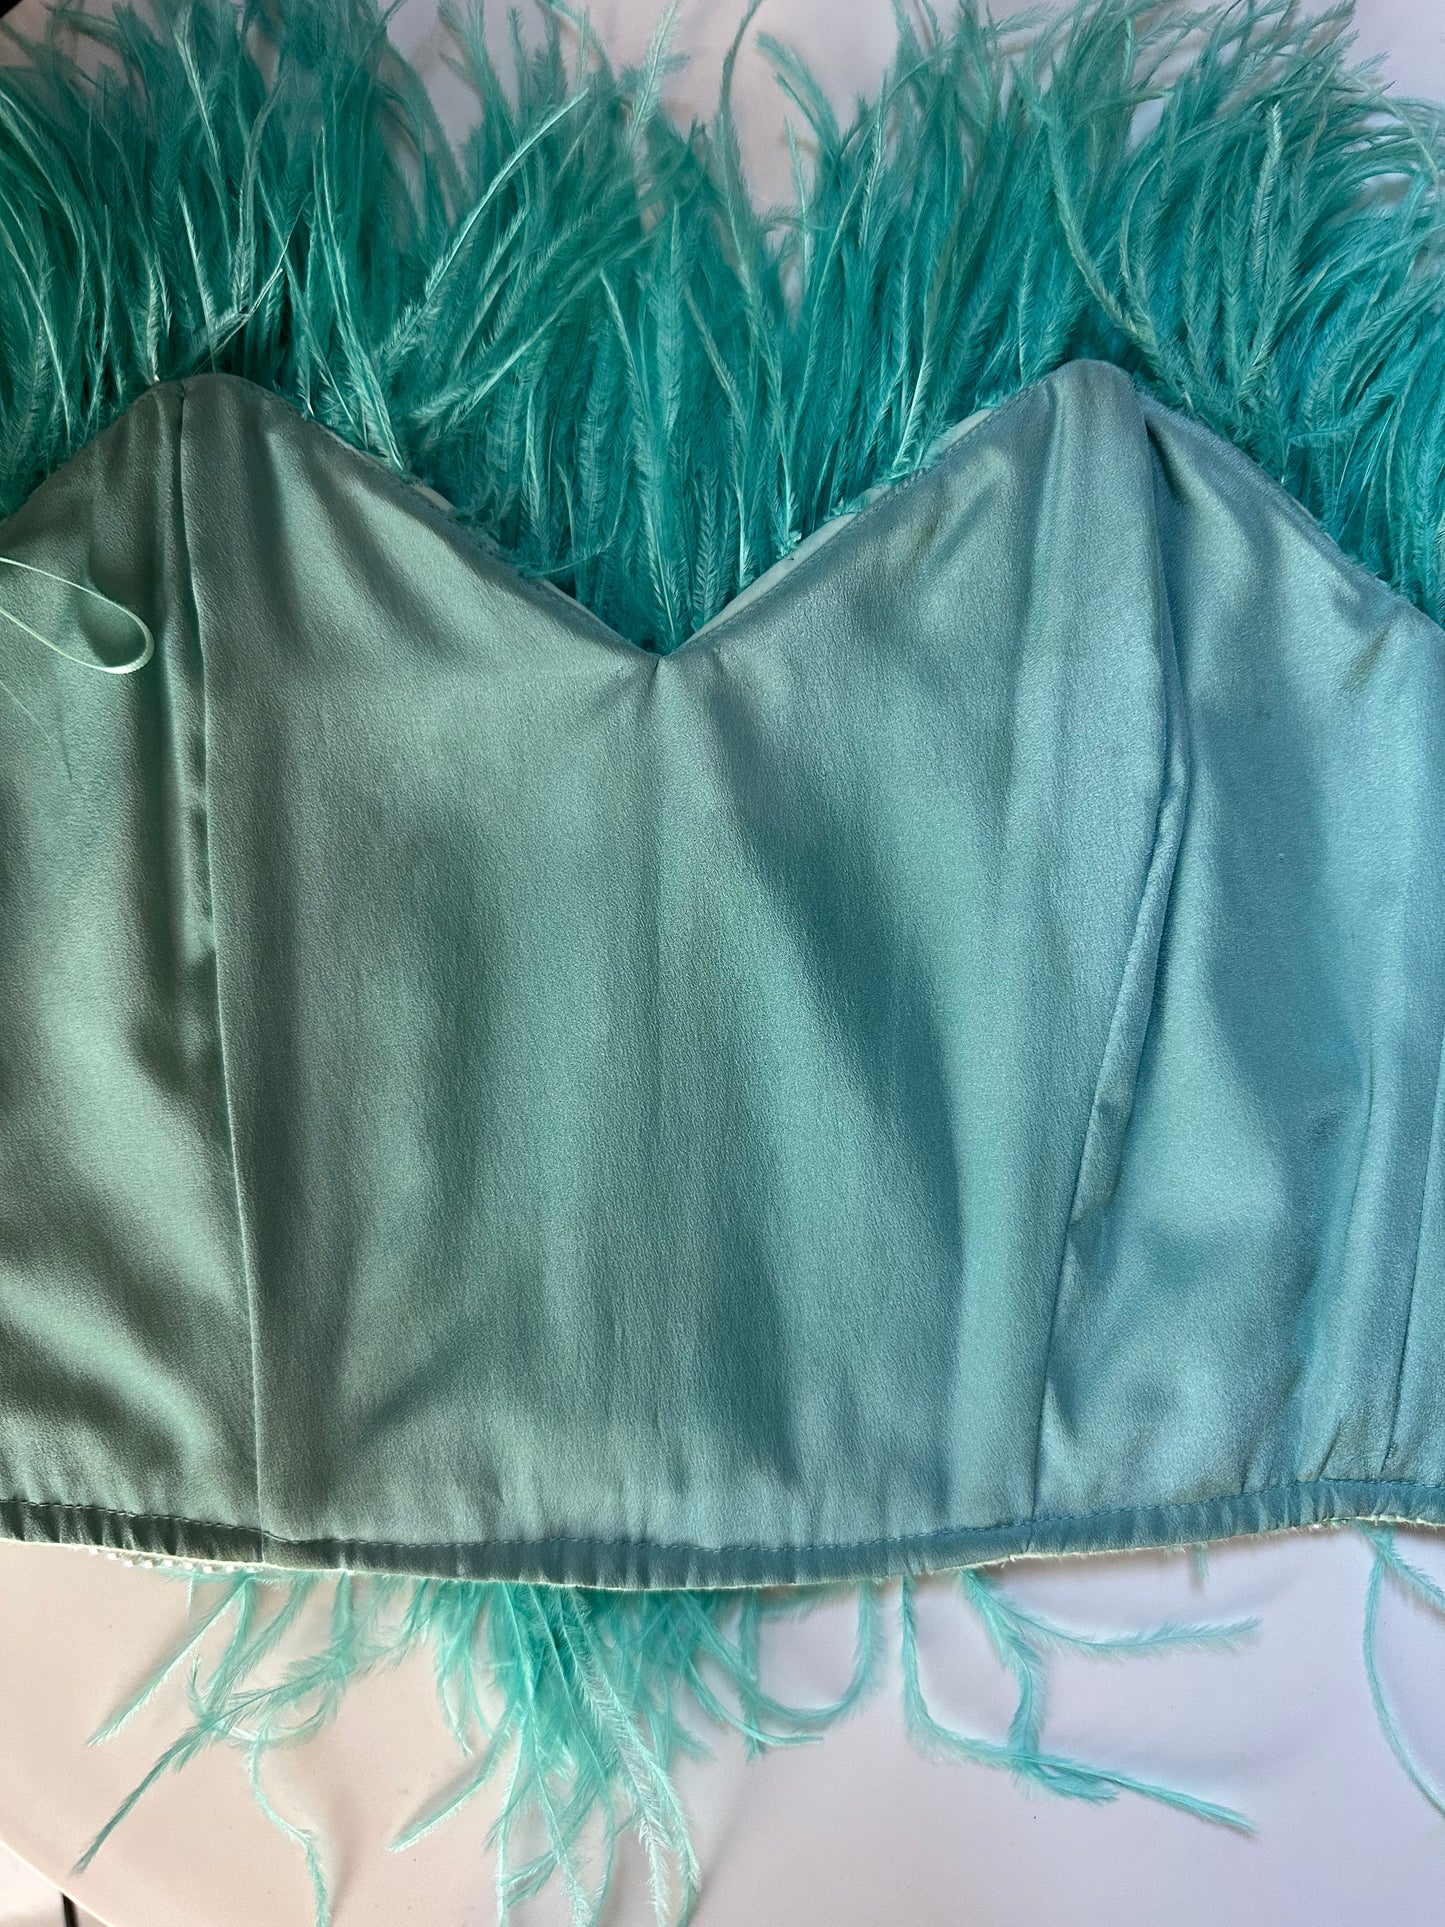 ATTICO - Bustier feather turquoise size 36 IT